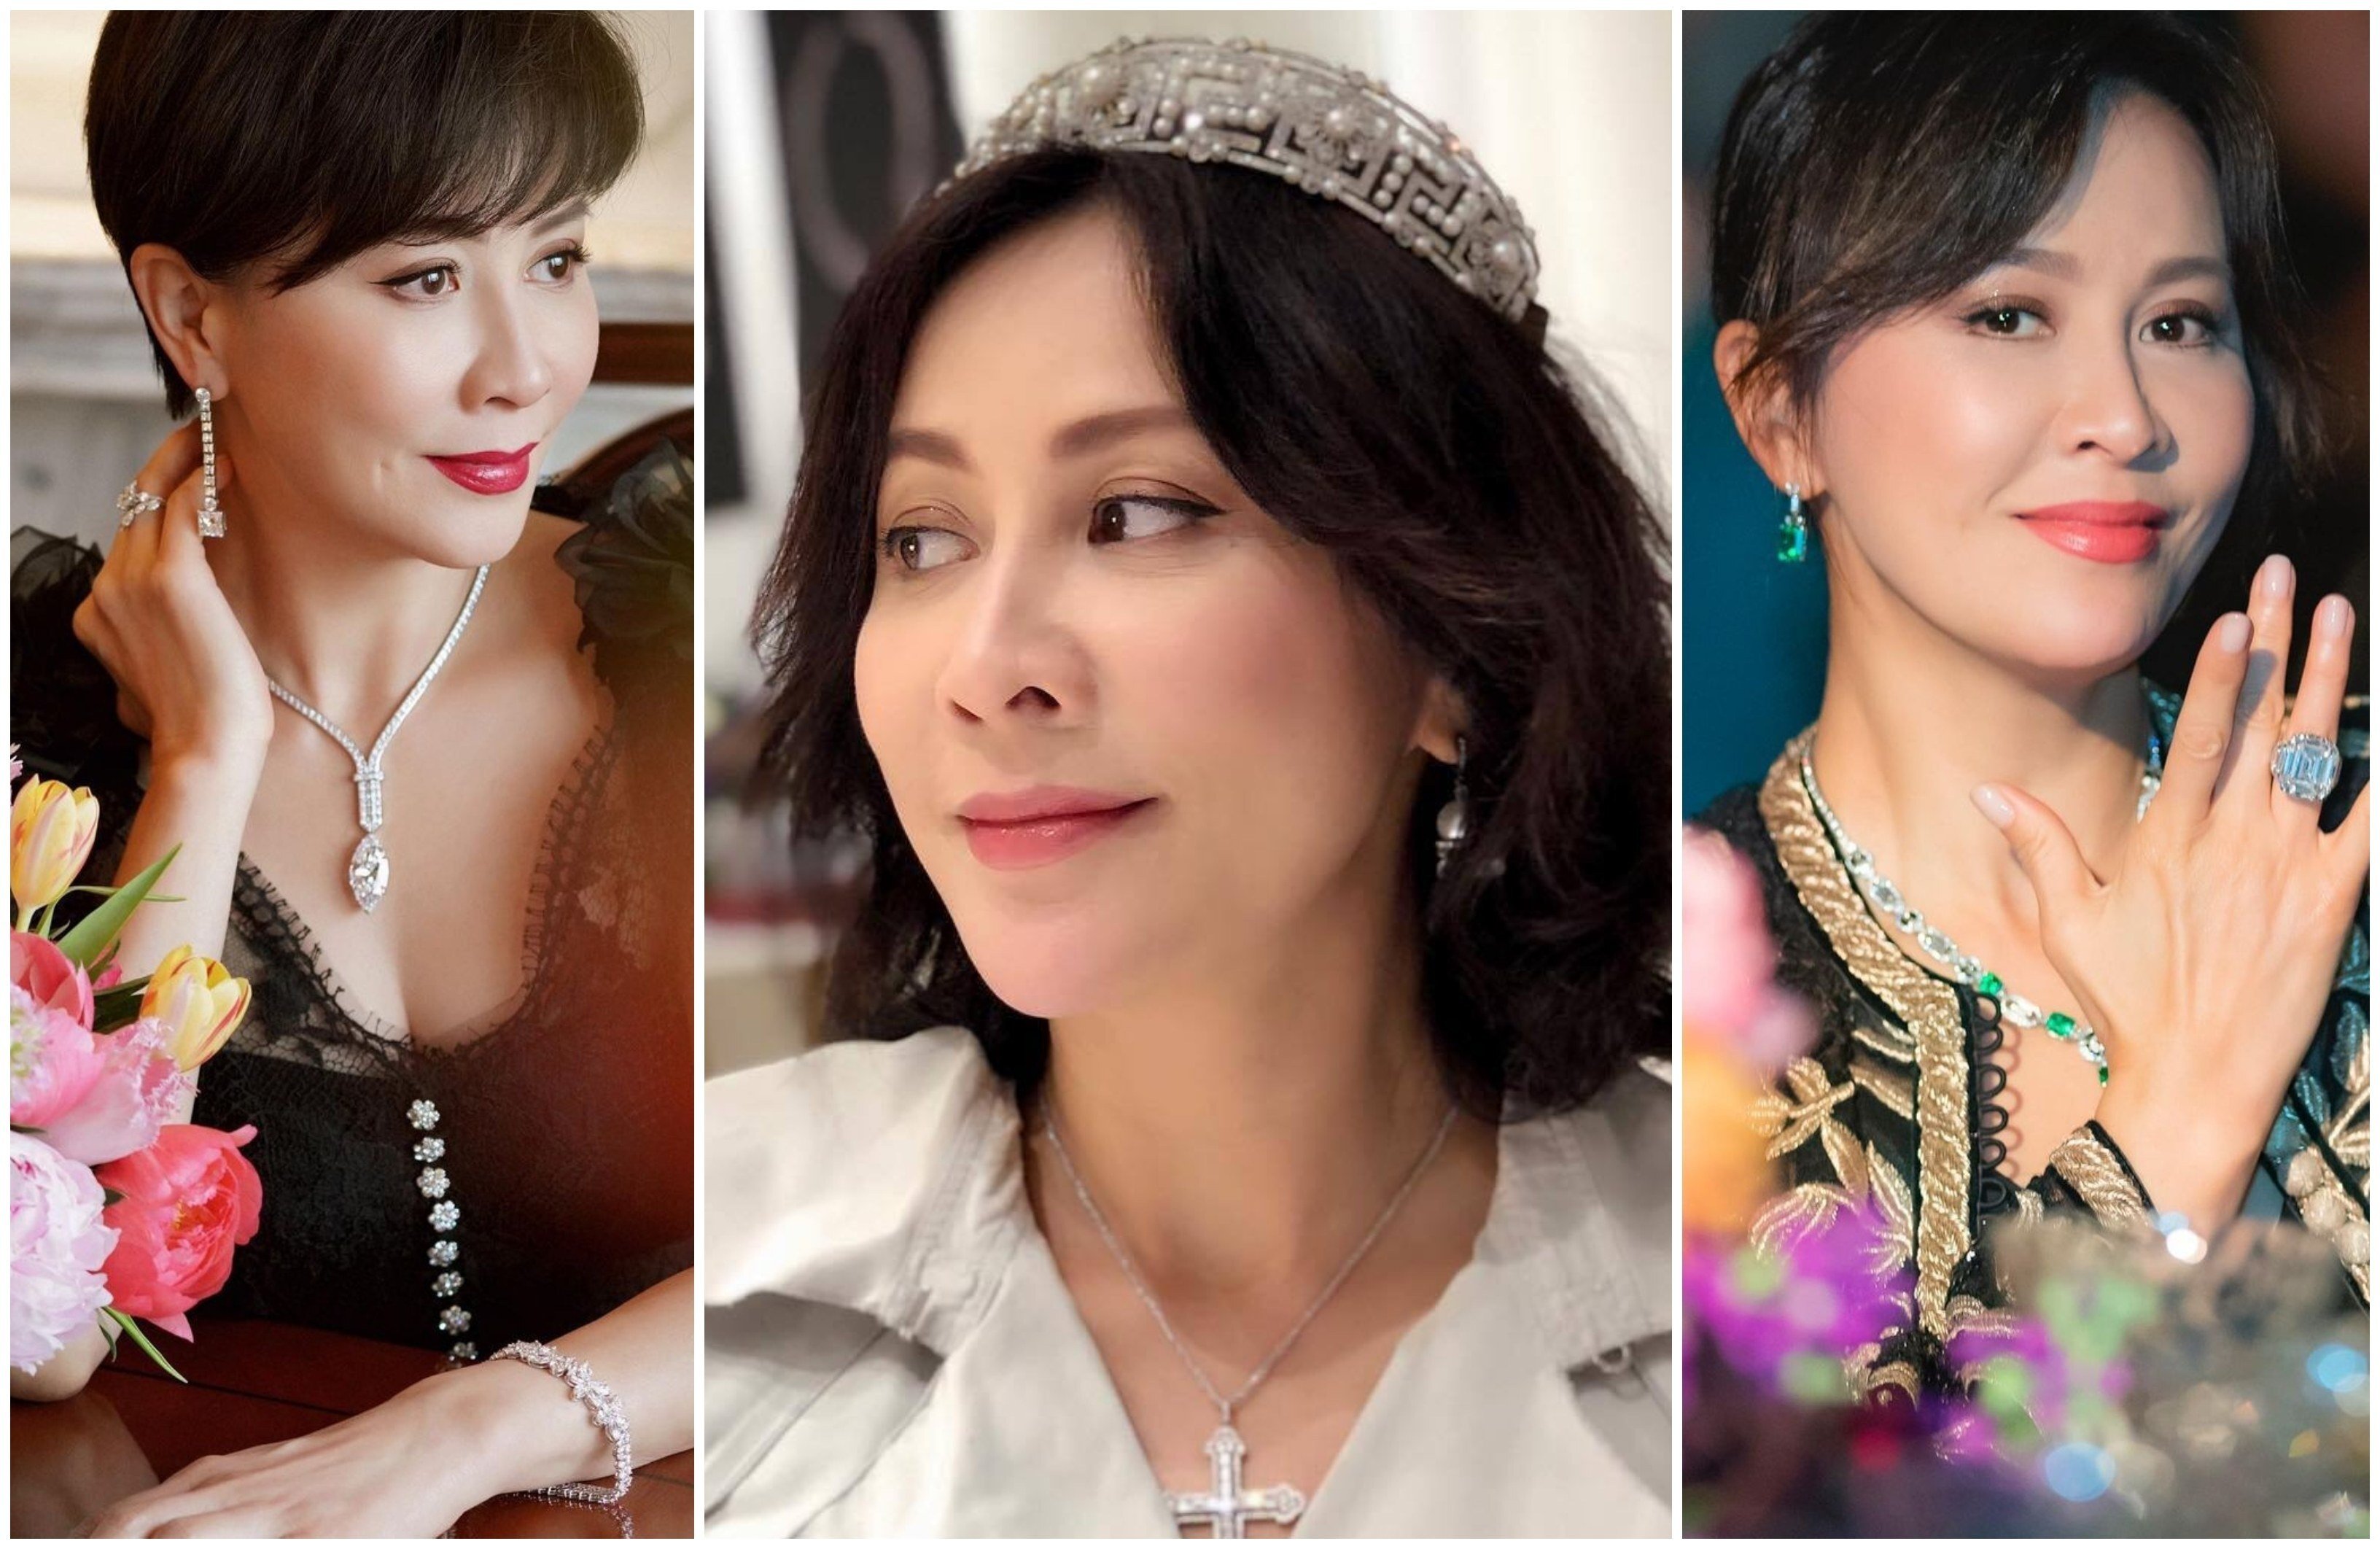 Hong Kong icon Carina Lau with her dazzling jewellery pieces. Photo: @carinalau1208/Instagram